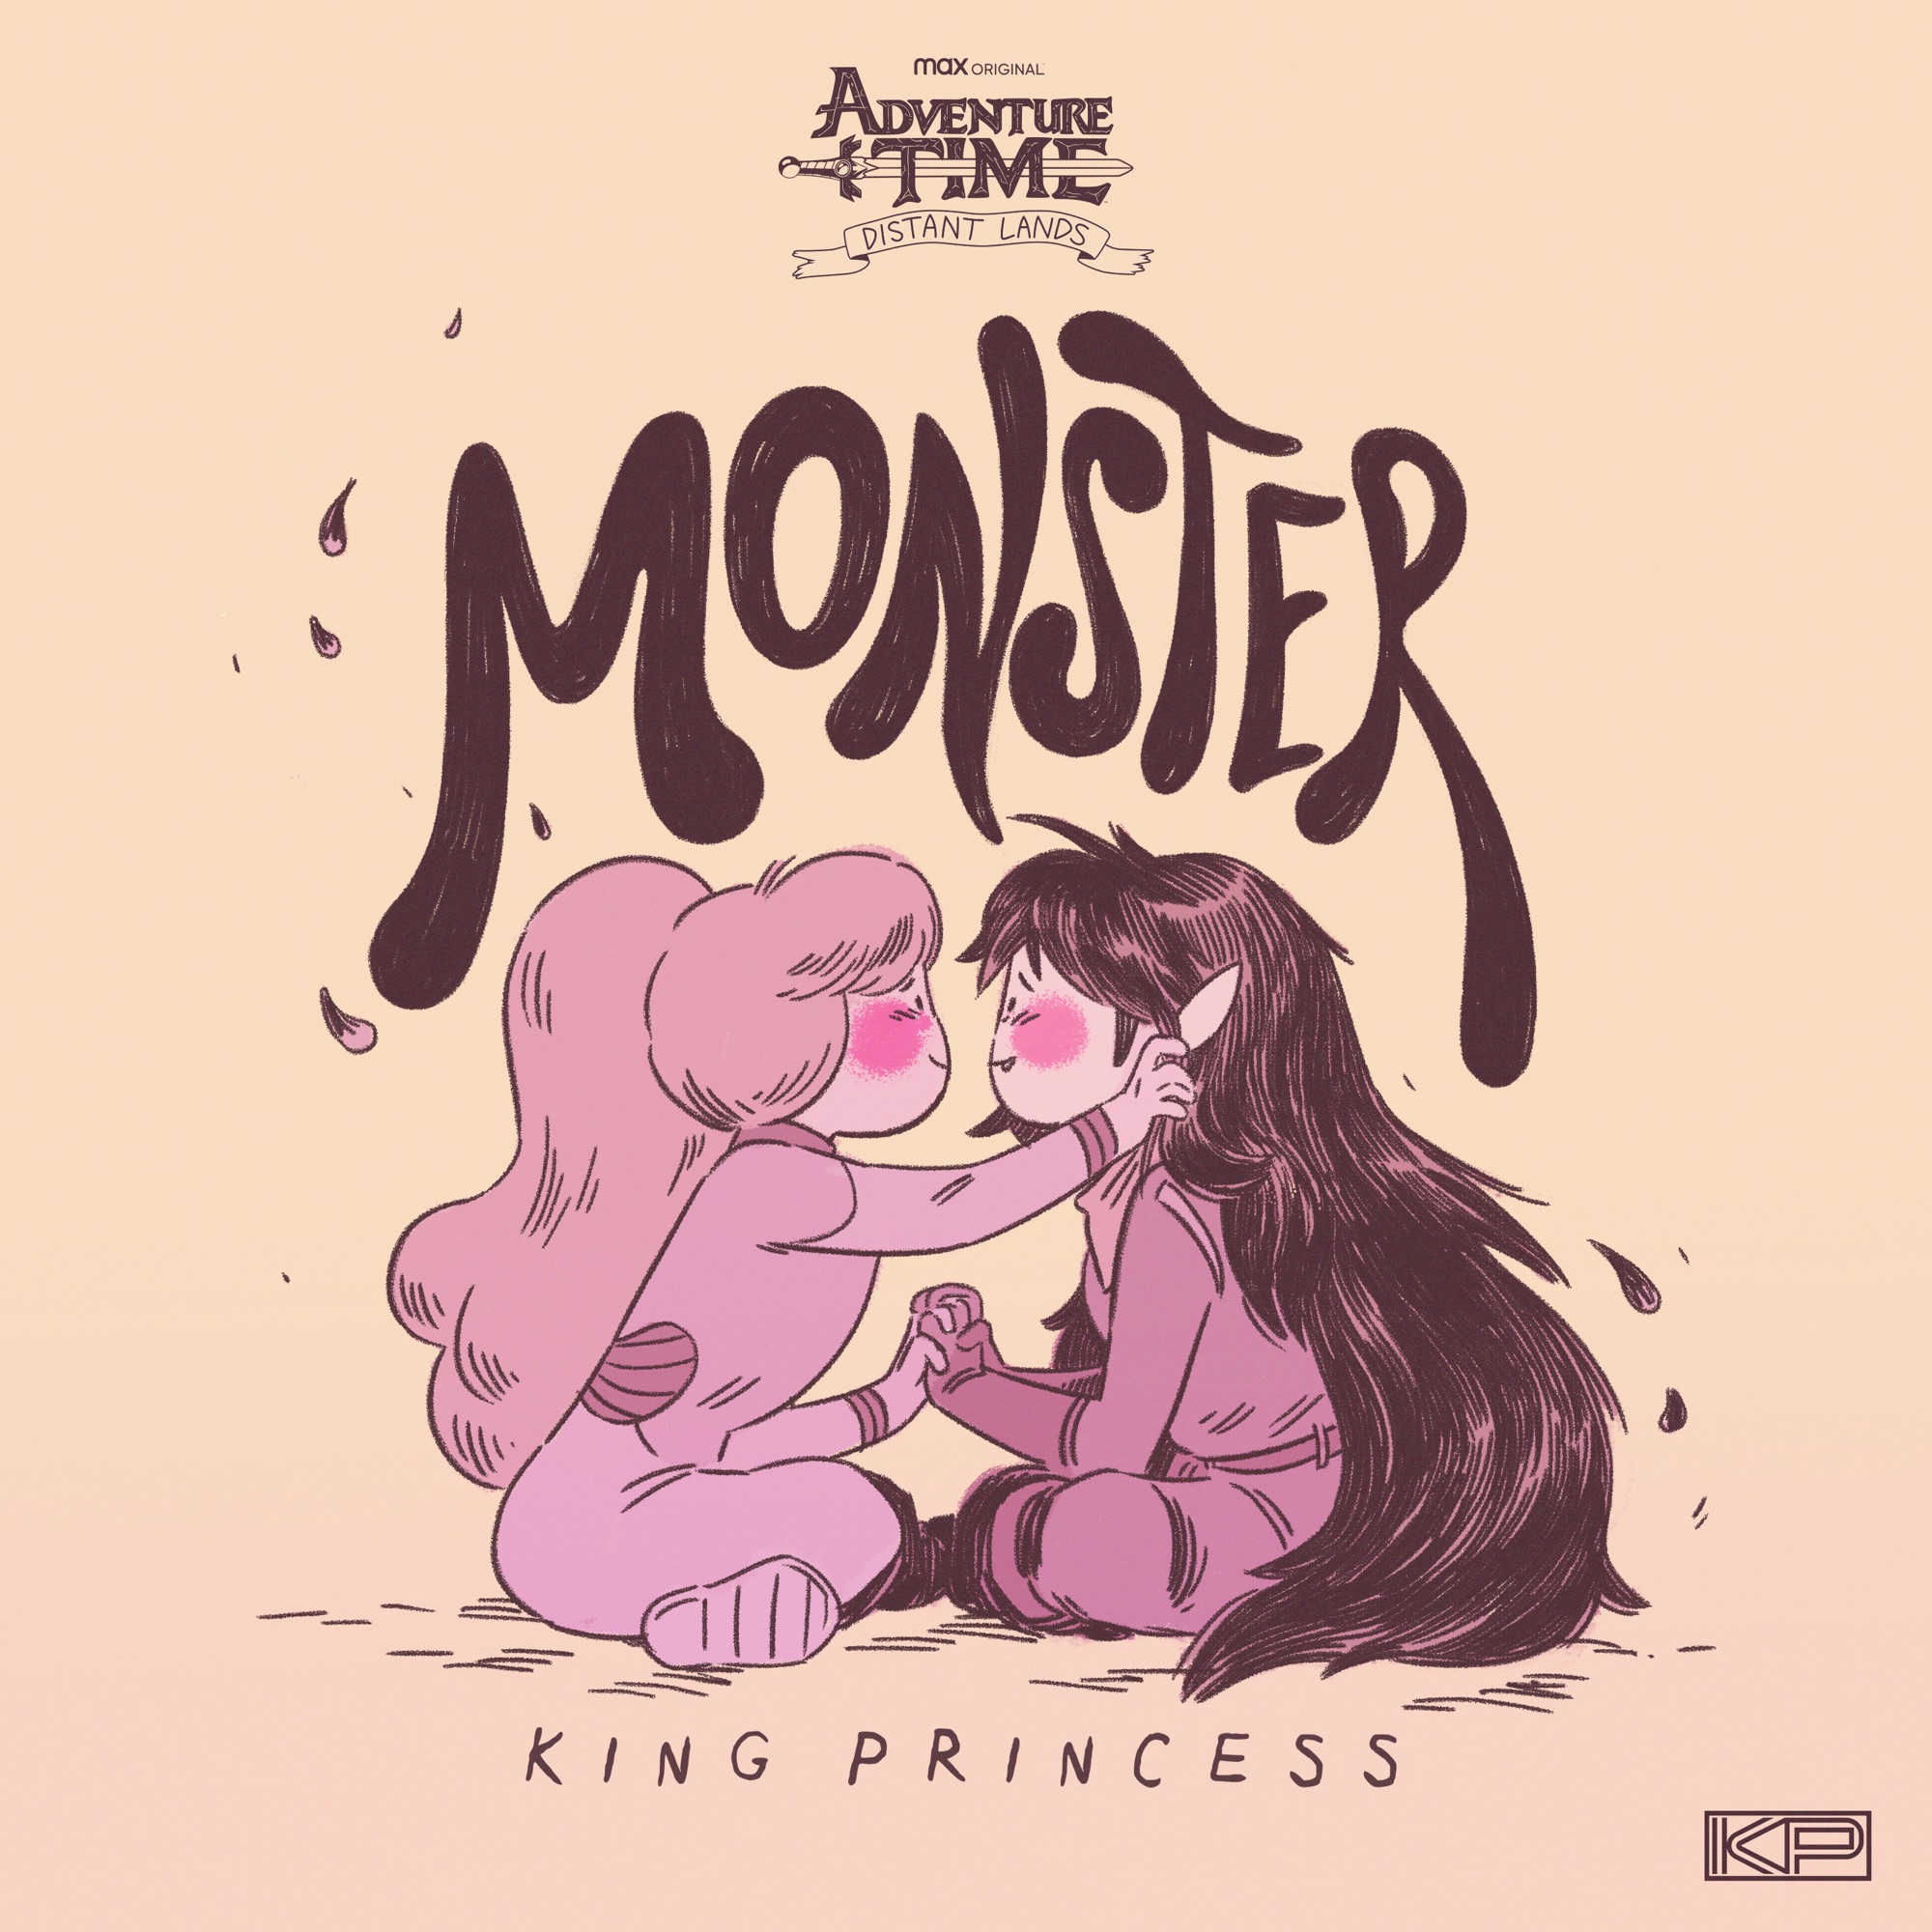 Adventure Time & King Princess - Monster (From the Max Original Adventure Time: Distant Lands - Obsidian) - Single